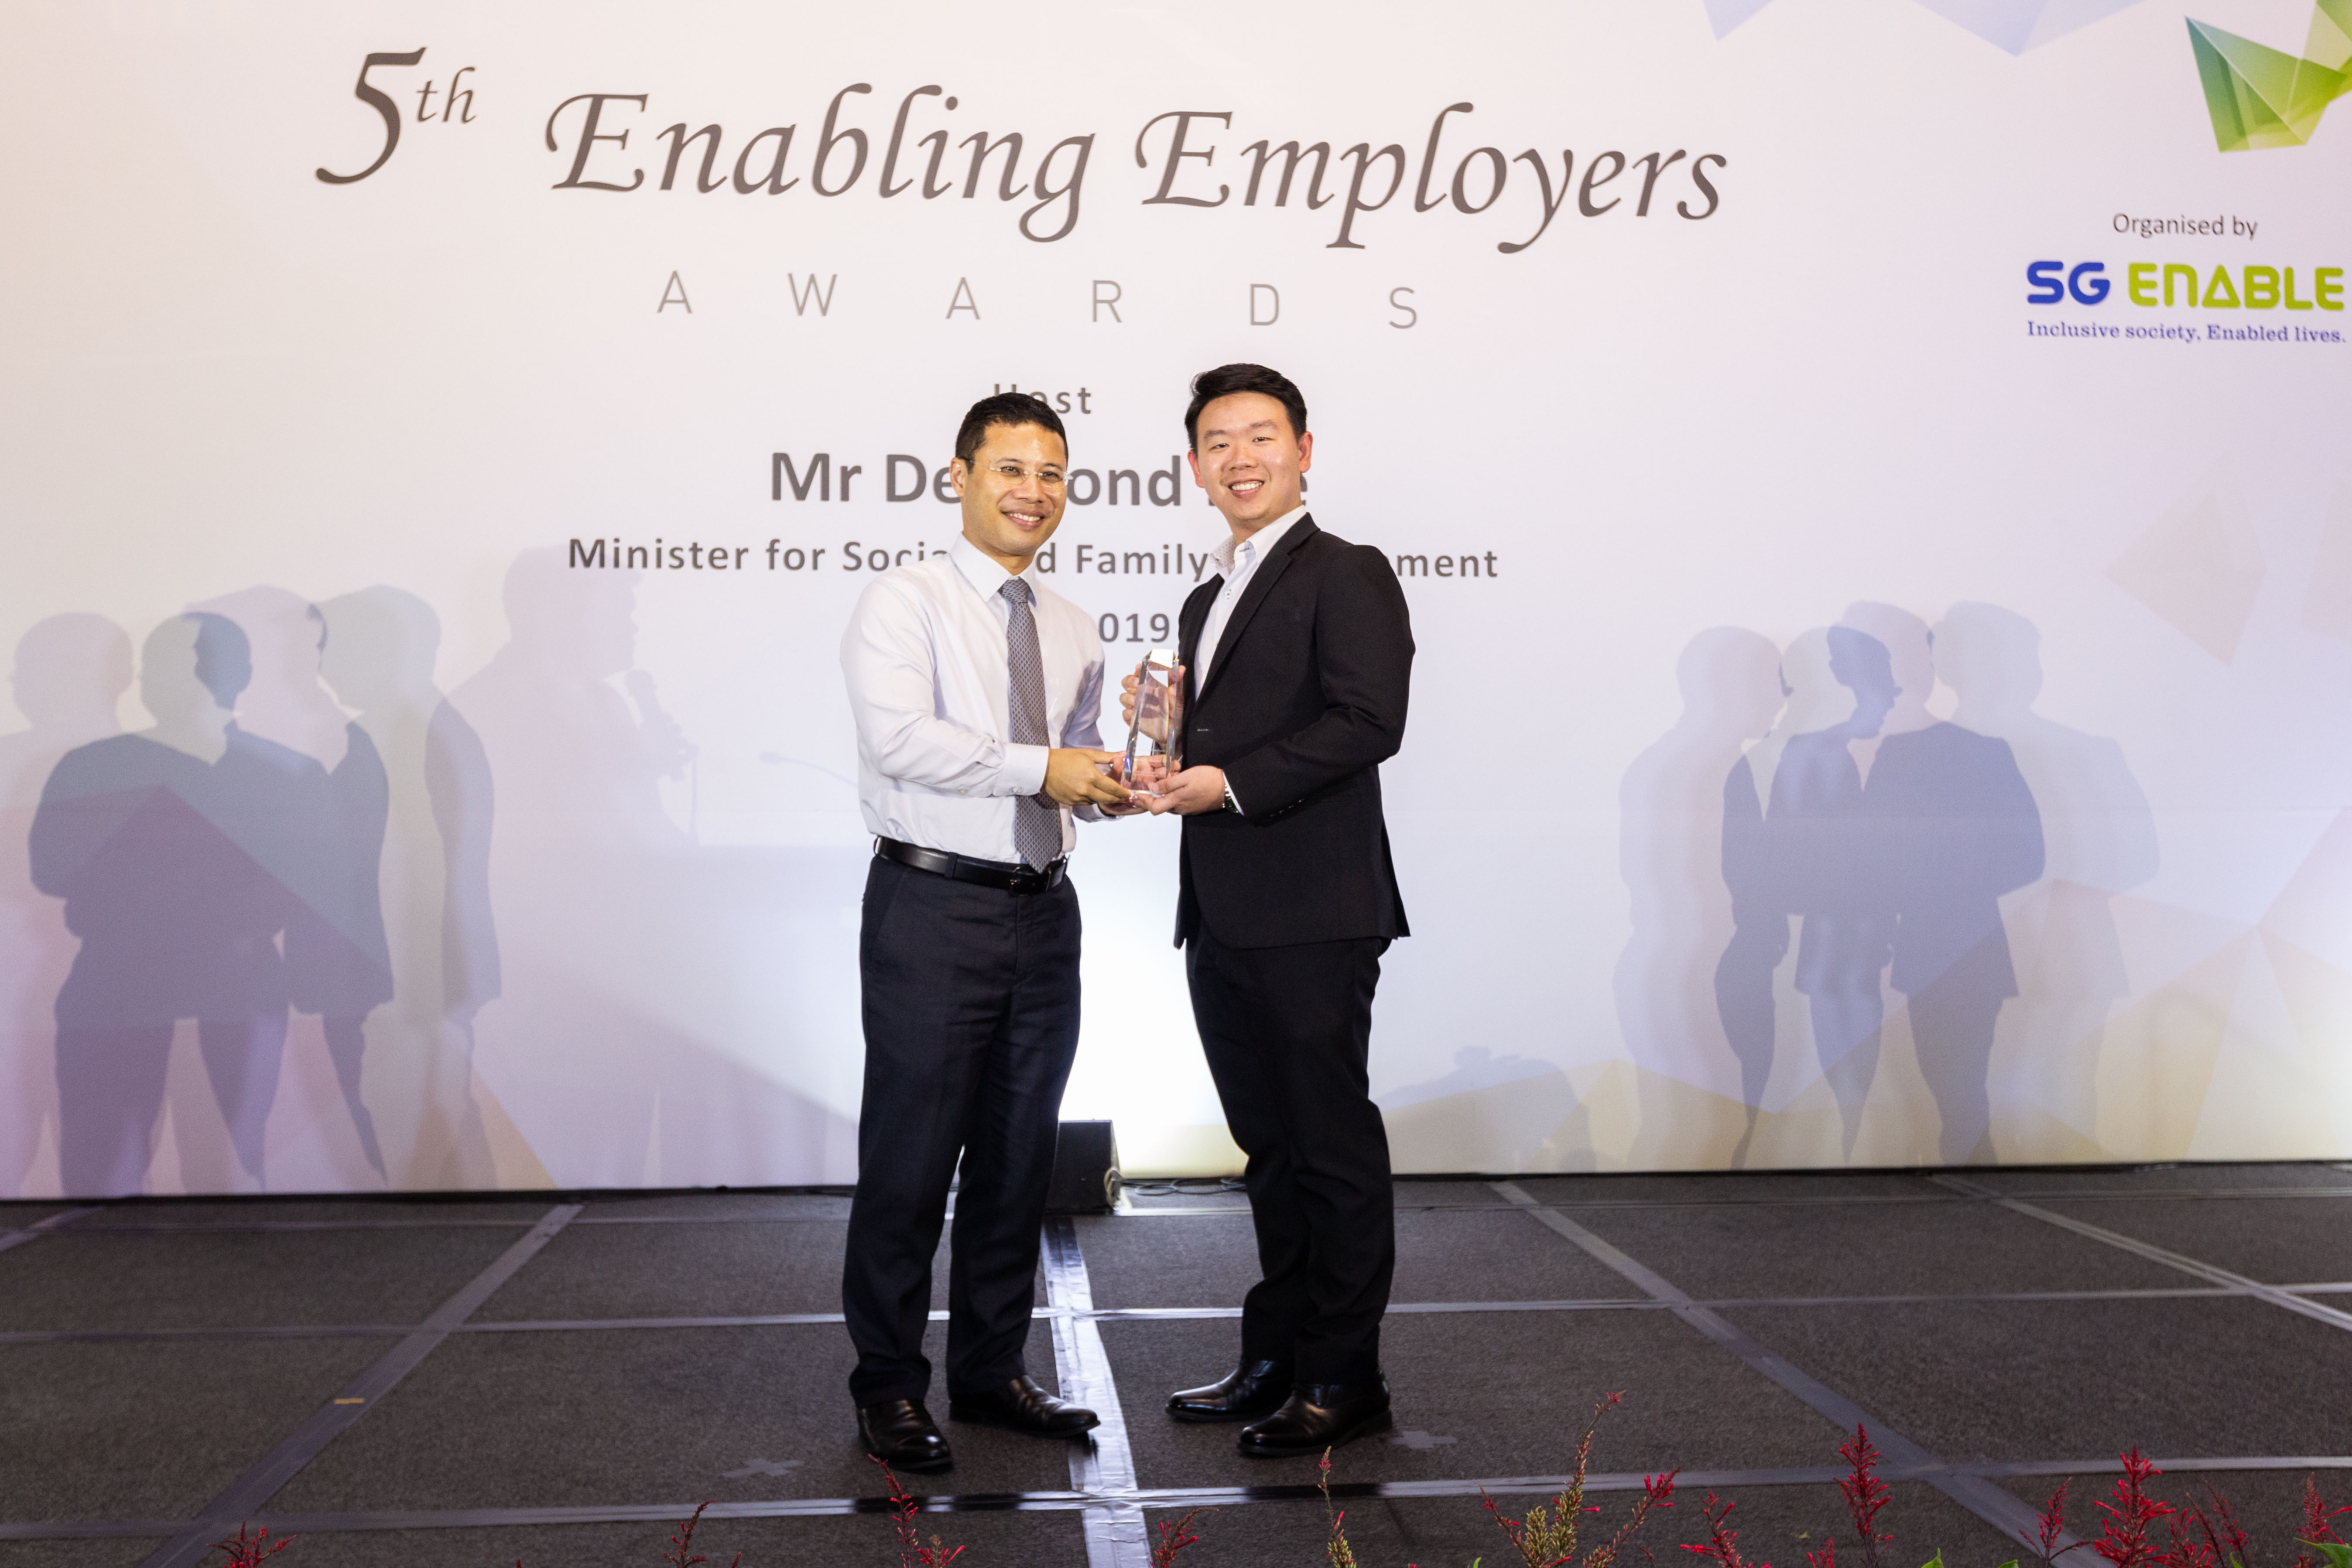 Benjamin (right) receiving the Enabling Champion Award at the 5th Enabling Employers Awards from Minister for Social and Family Development Desmond Lee.